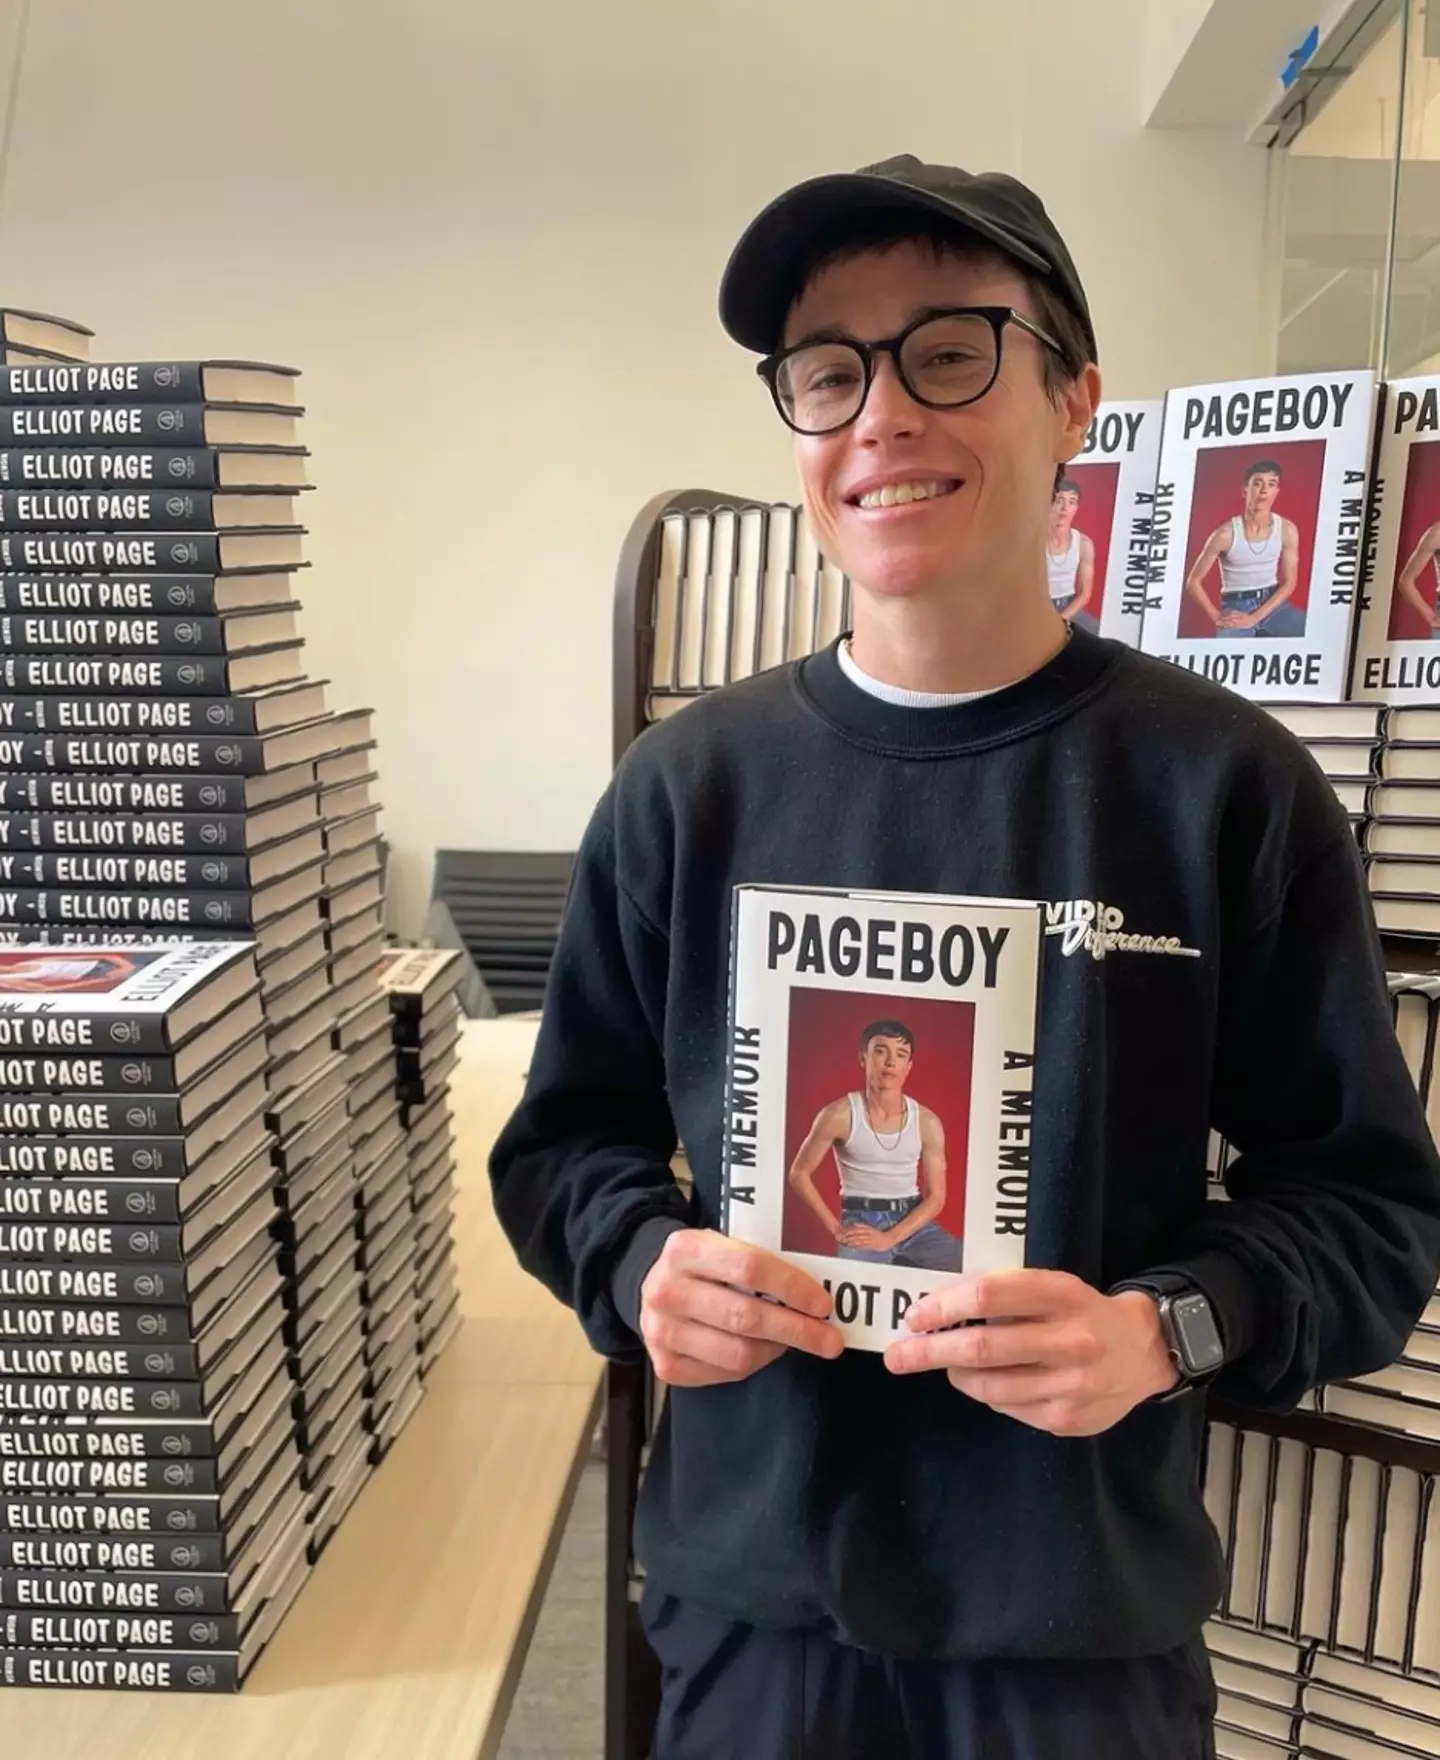 Elliot Page's memoir, Pageboy, was released today.